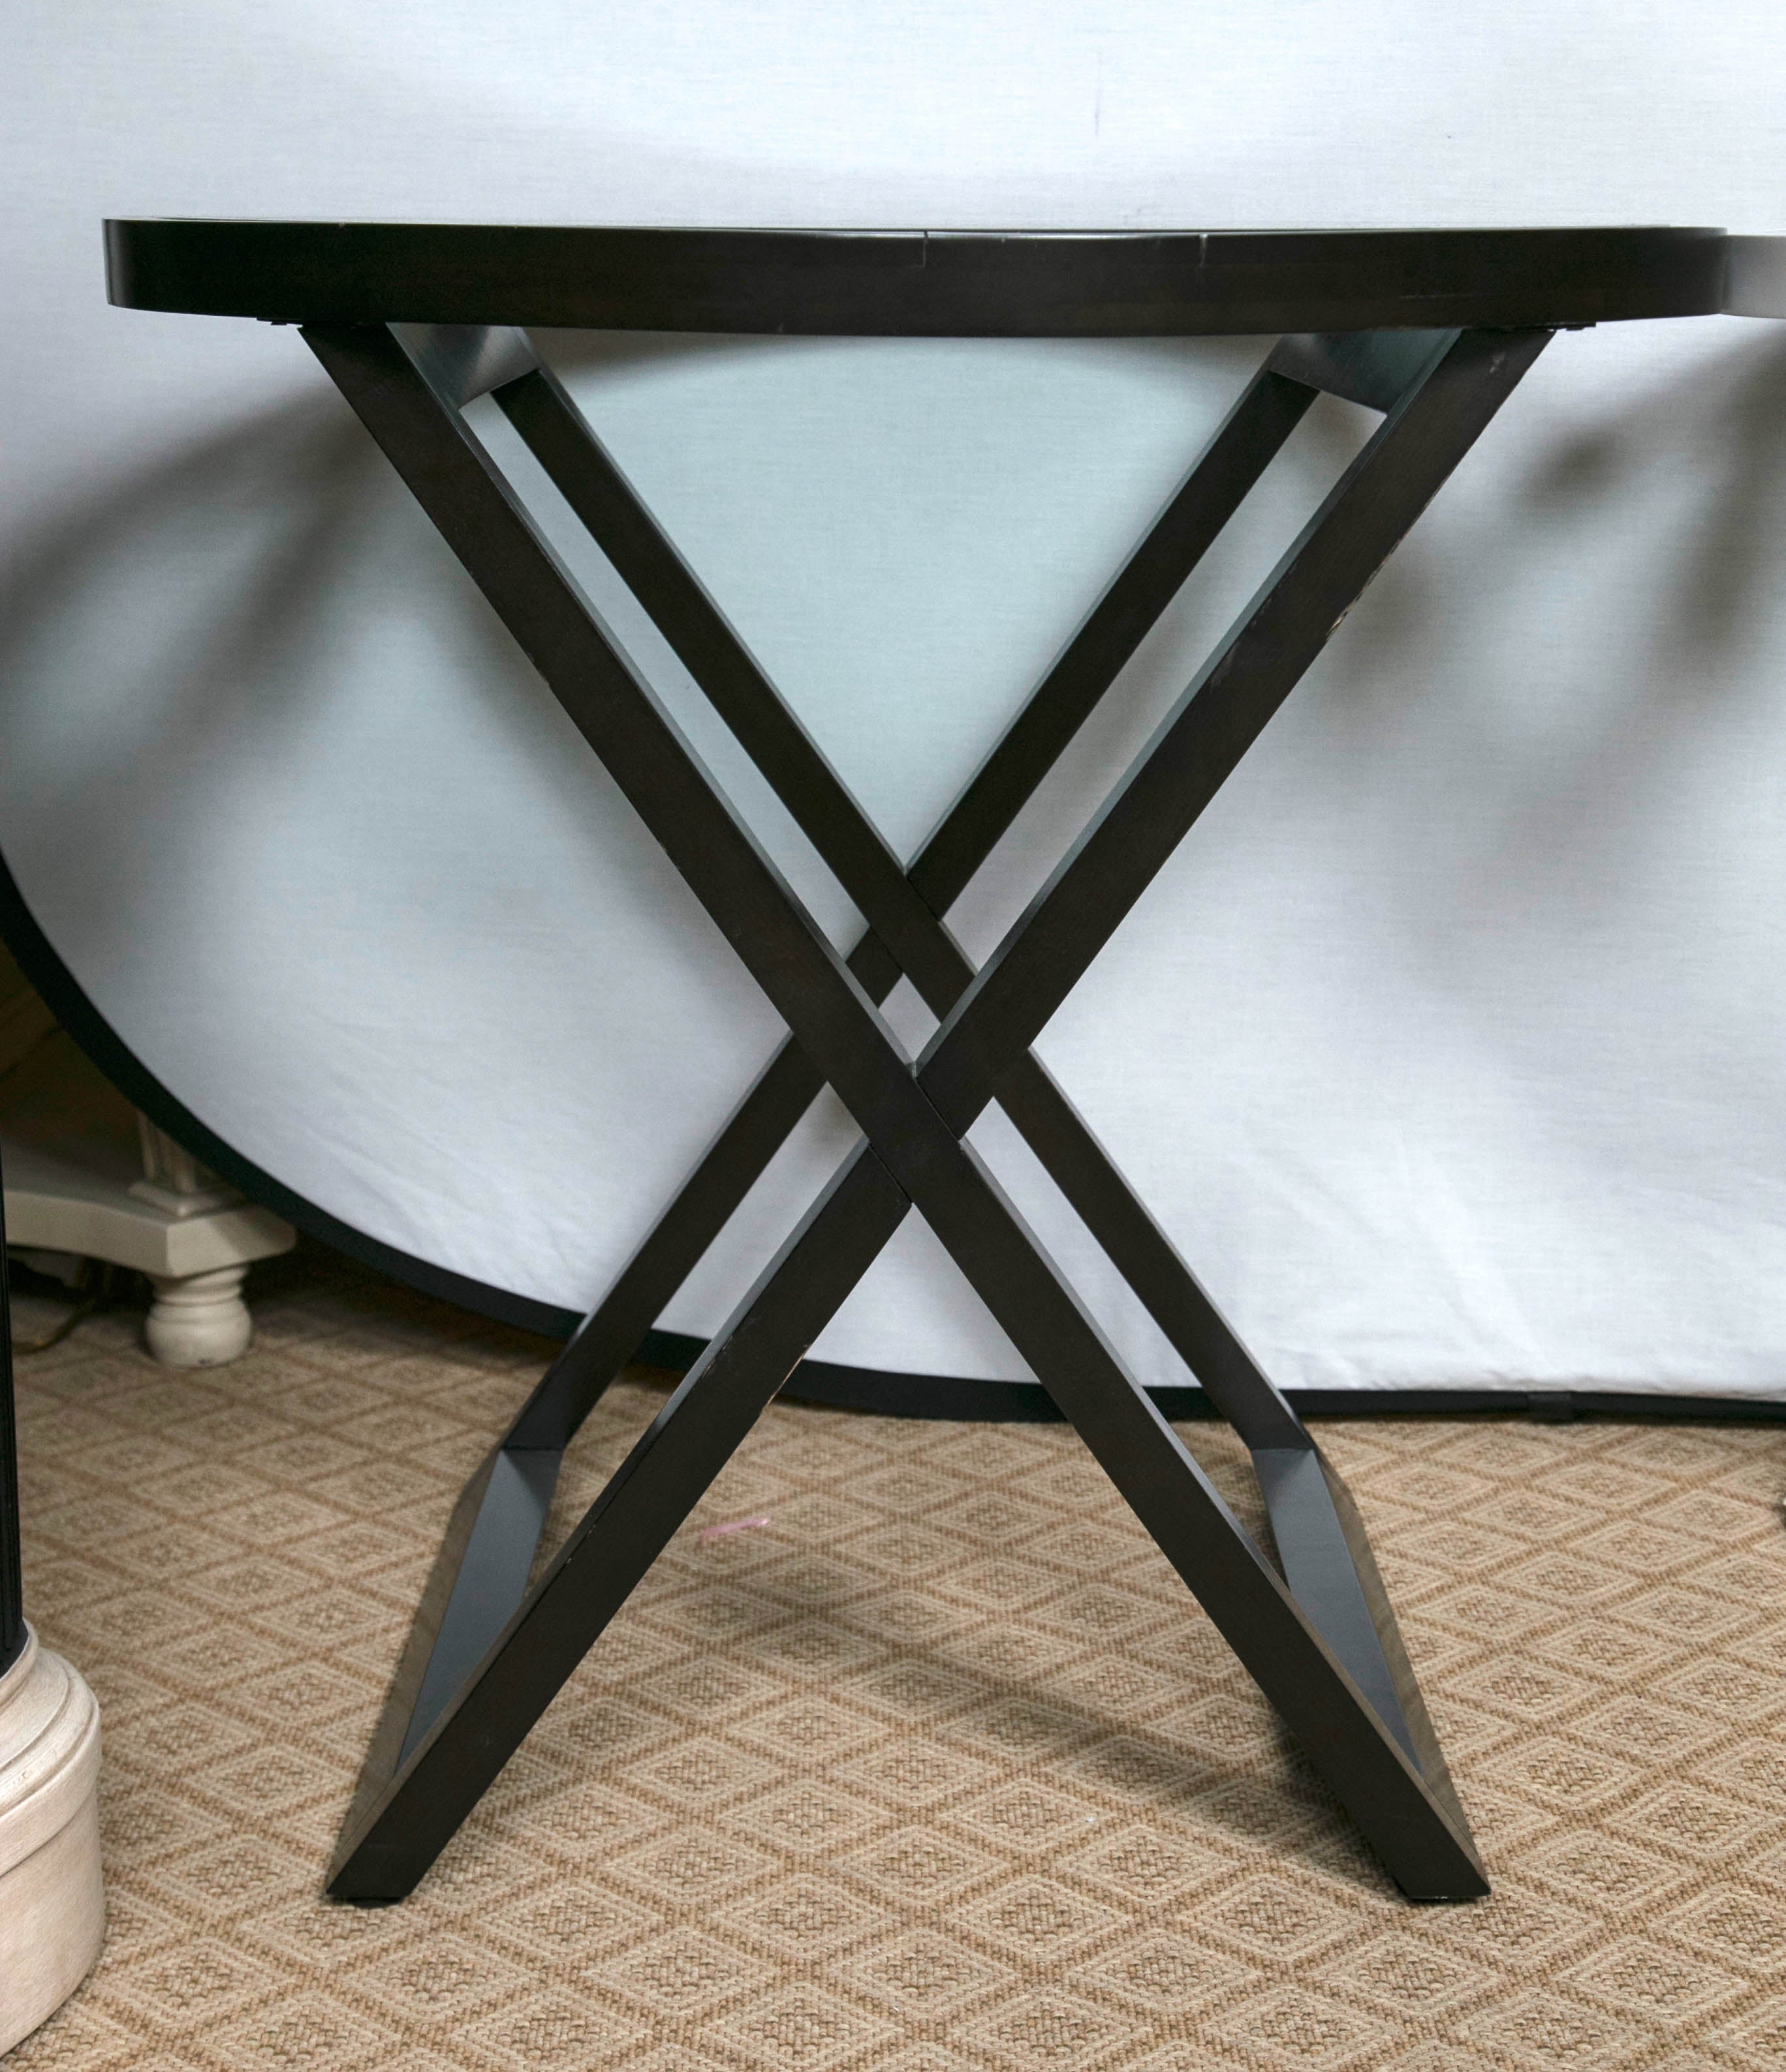 Compatable Black Ralph Lauren Mercer Street Lacquered Table. The glass top allows for an open feel. A bistro or a lamp table it's up to you. By Ralph Lauren. 